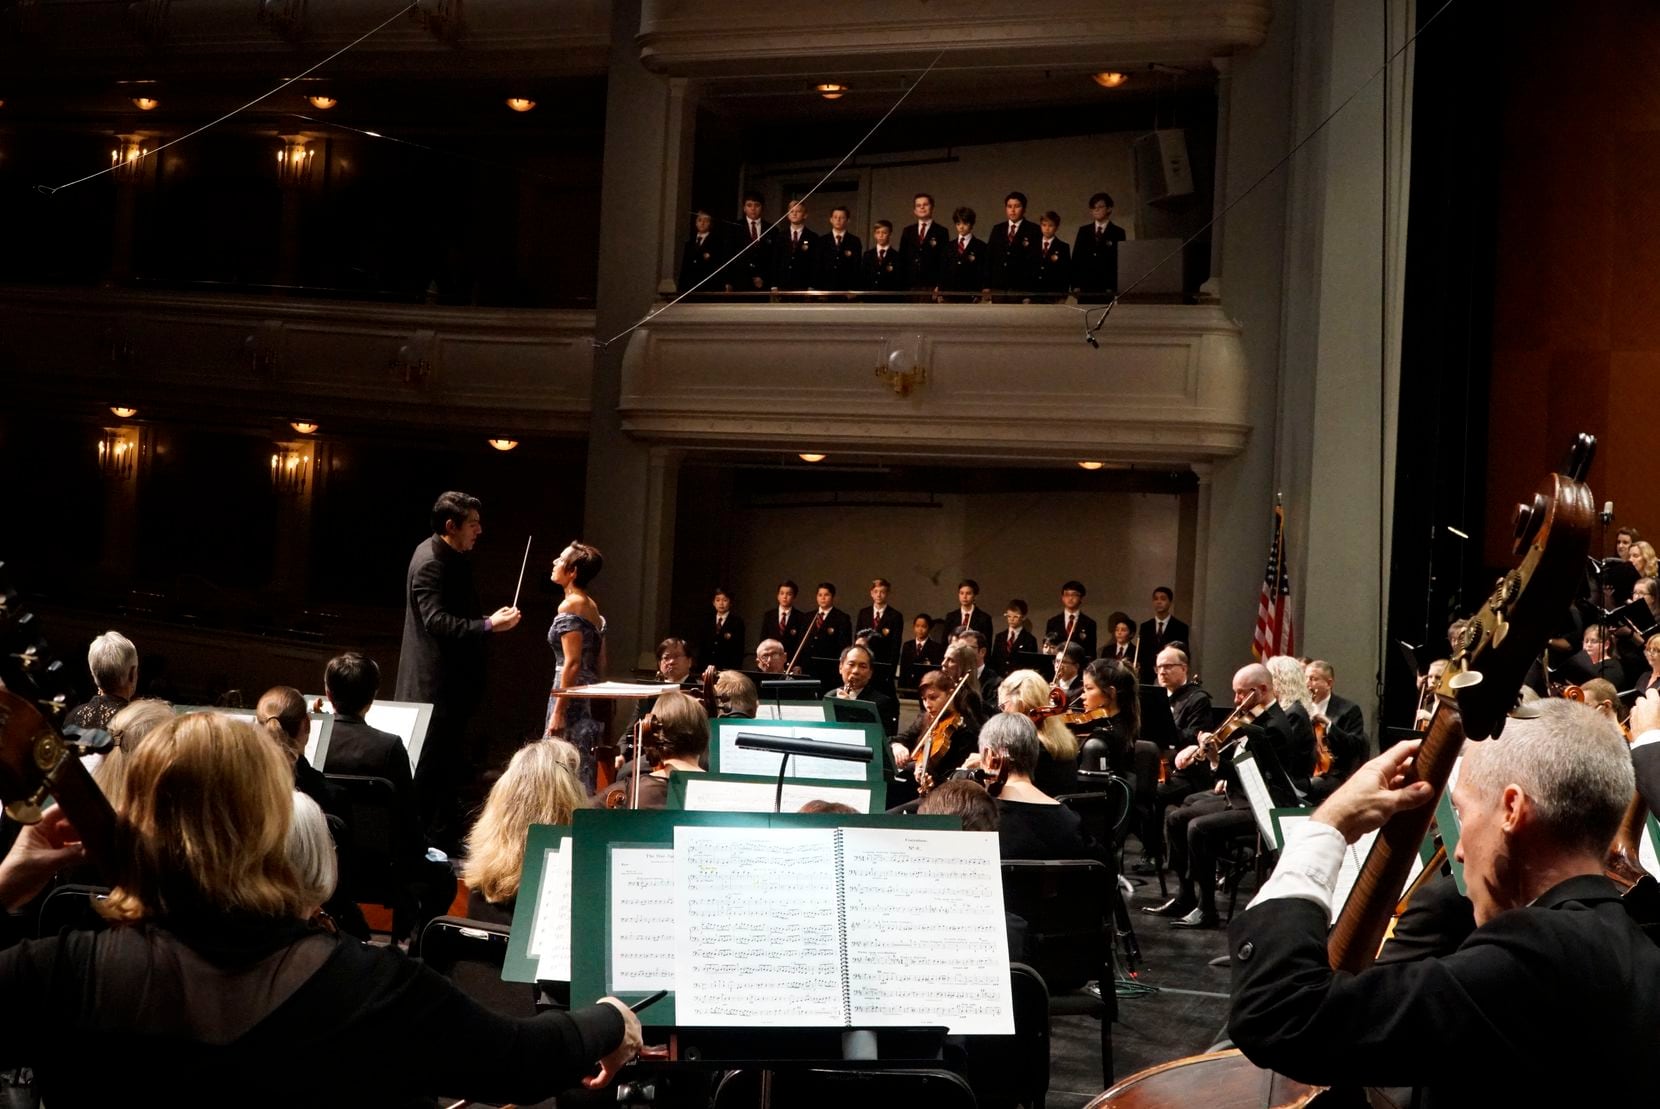 The Fort Worth Symphony Orchestra performs Mahler’s Third Symphony with Soloist Kelley O’Connor and The Texas Boys Choir at Bass Performance Hall in Fort Worth, Texas on Friday October 11, 2019. 